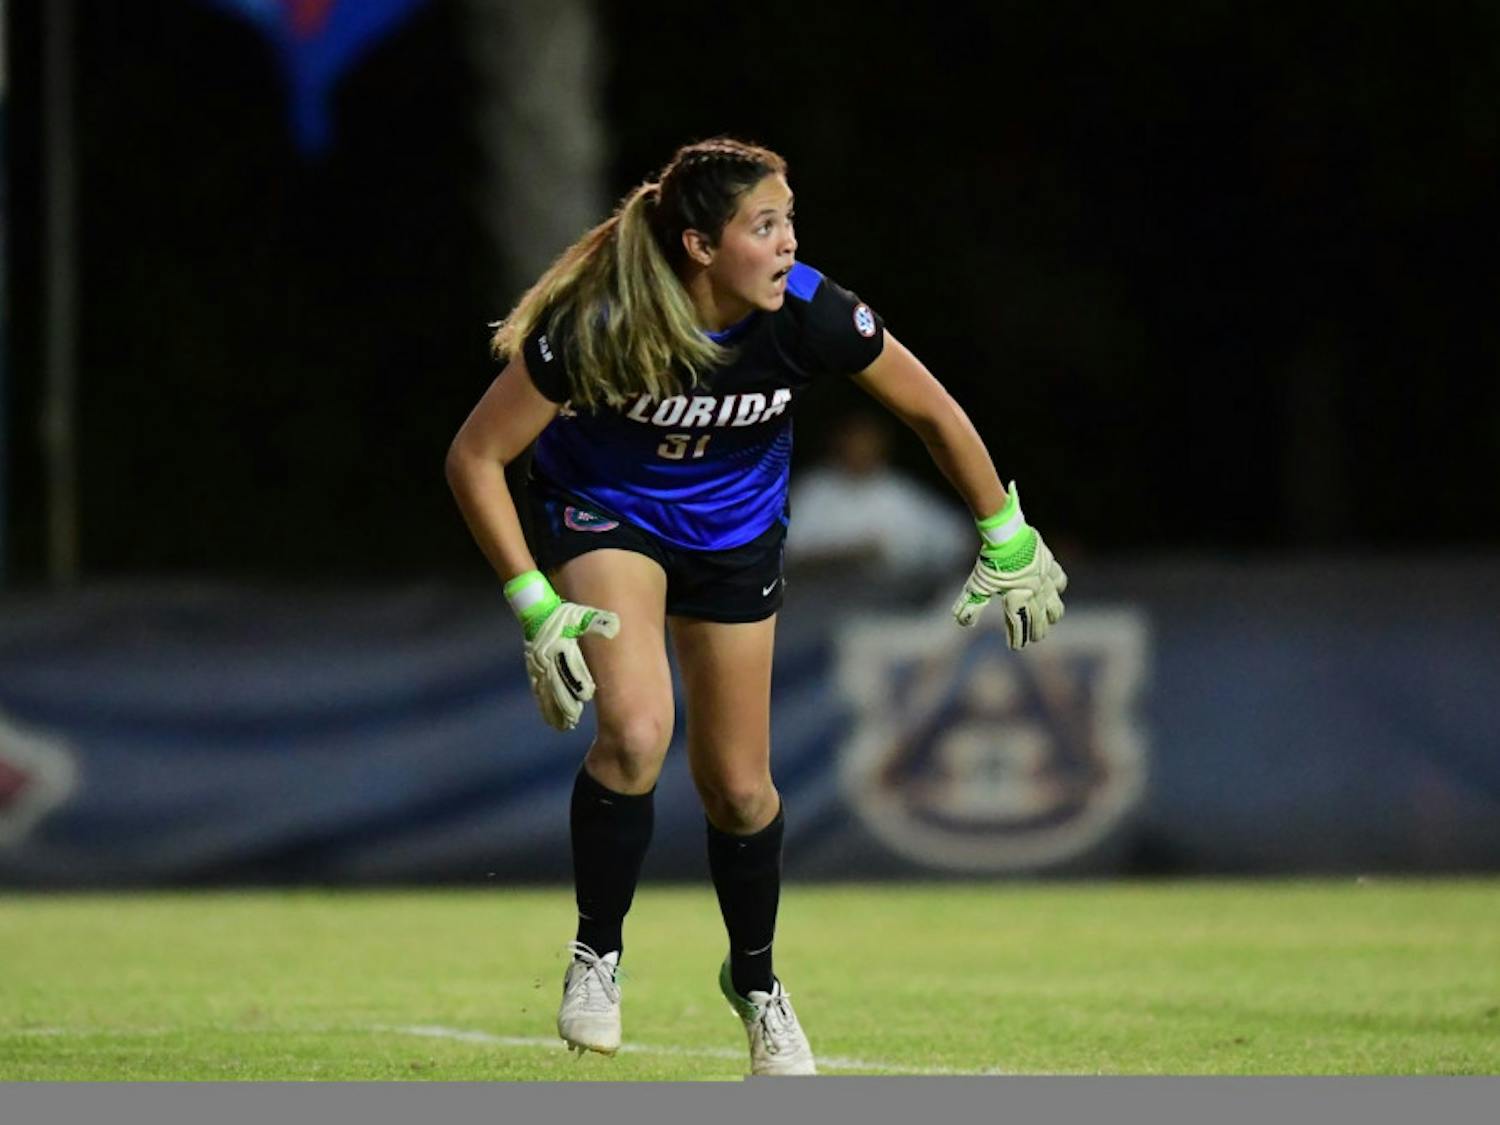 Former UF goalkeeper Kaylan Marckese broke the school record for shutouts, finished second among UF goalkeepers in minutes and third in starts and saves and is tied for third in wins.